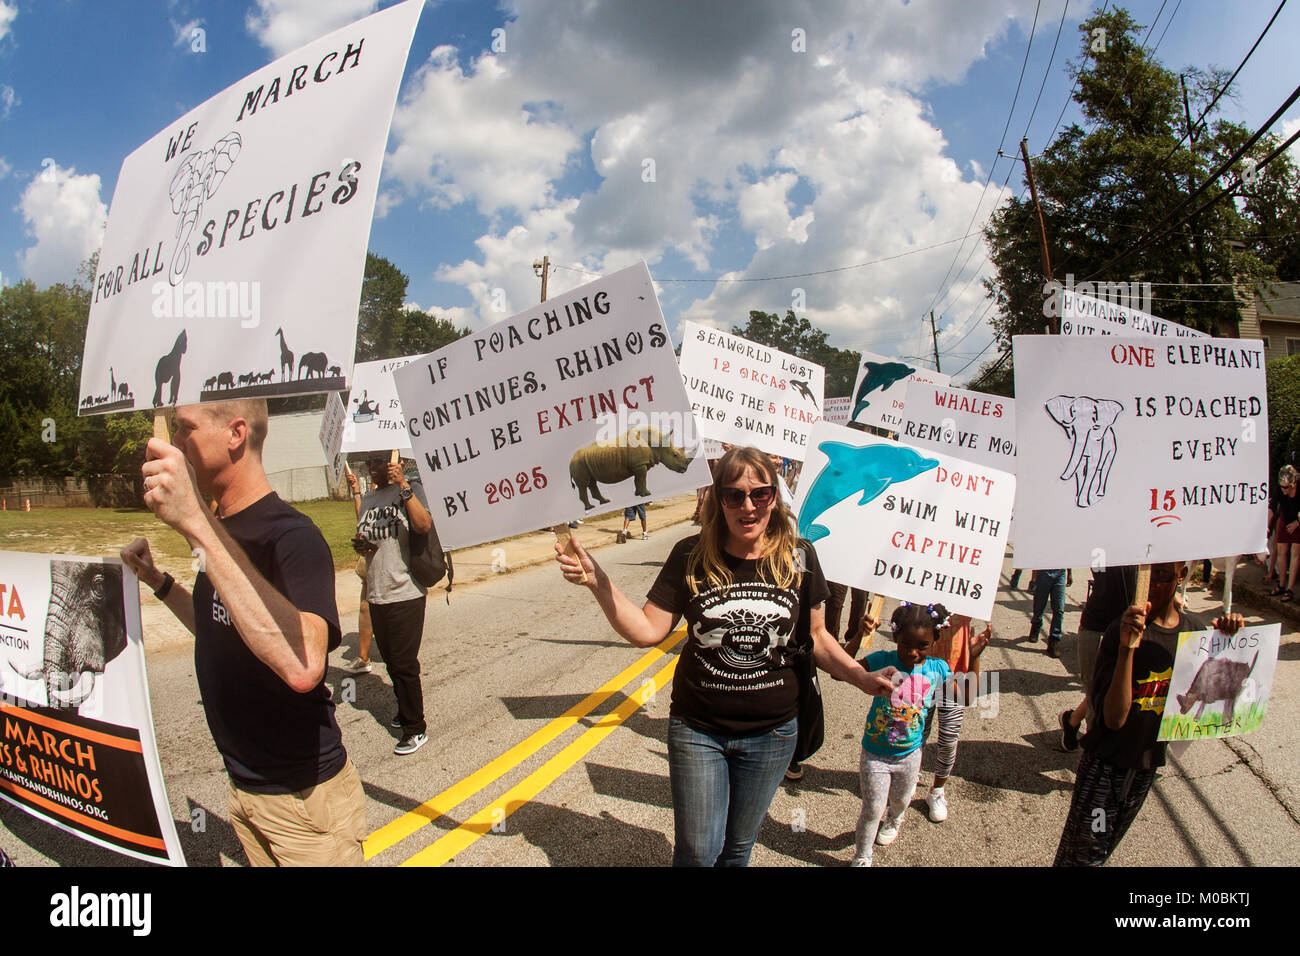 Atlanta, GA, USA - September 23, 2017:  A group of animal rights activists carry signs about rhinos and elephants as they walk in the East Atlanta Str Stock Photo